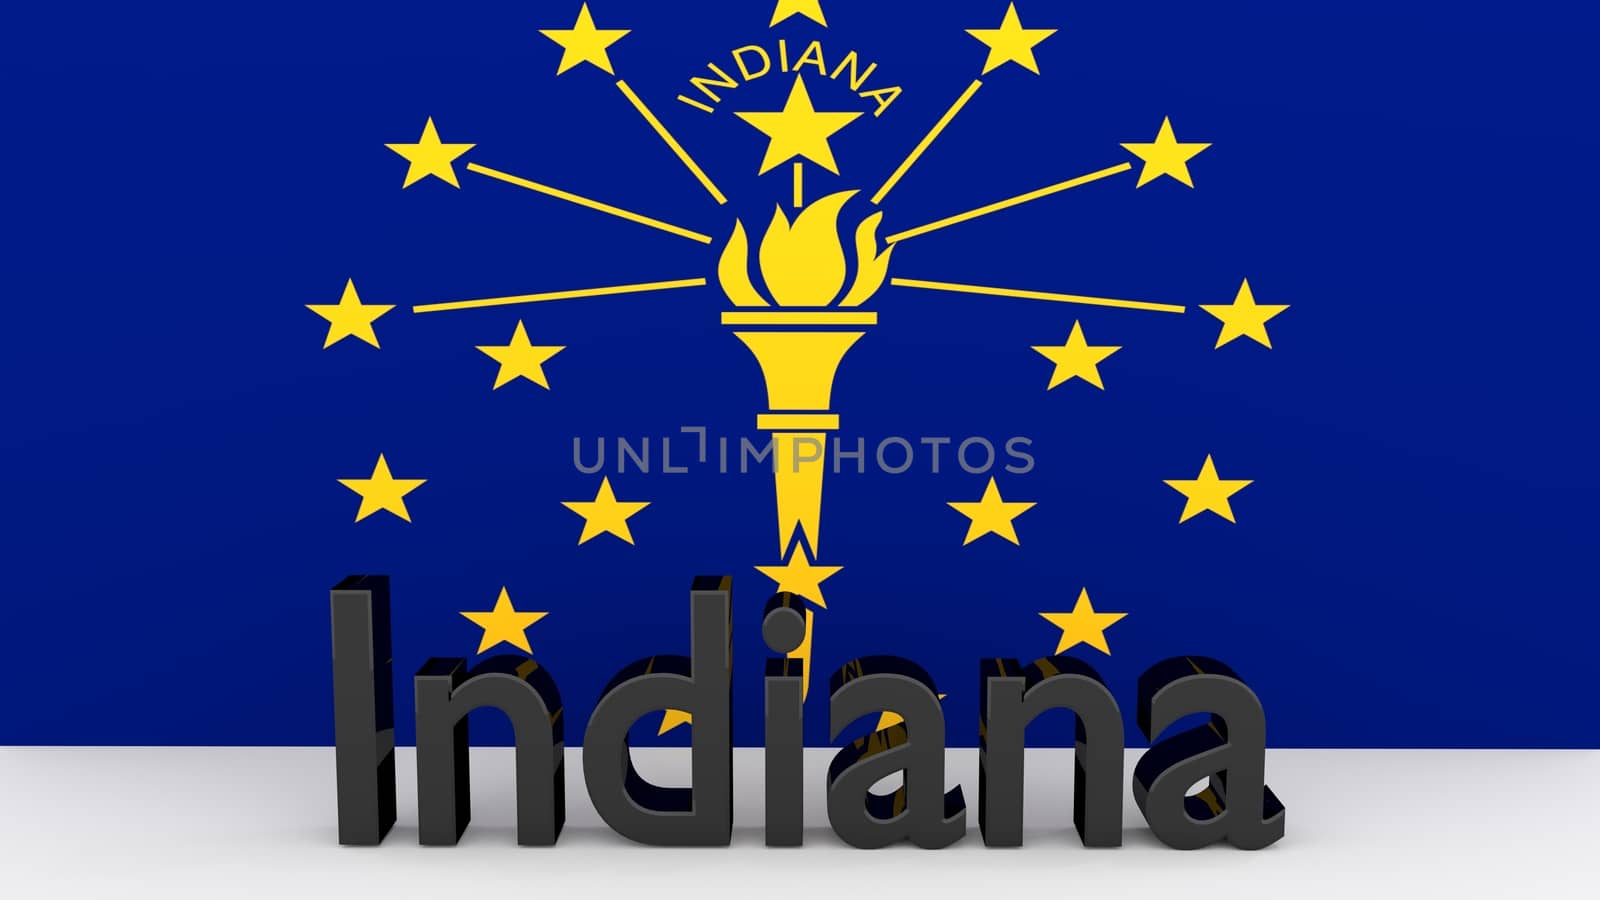 US state Indiana, metal name in front of flag by MarkDw